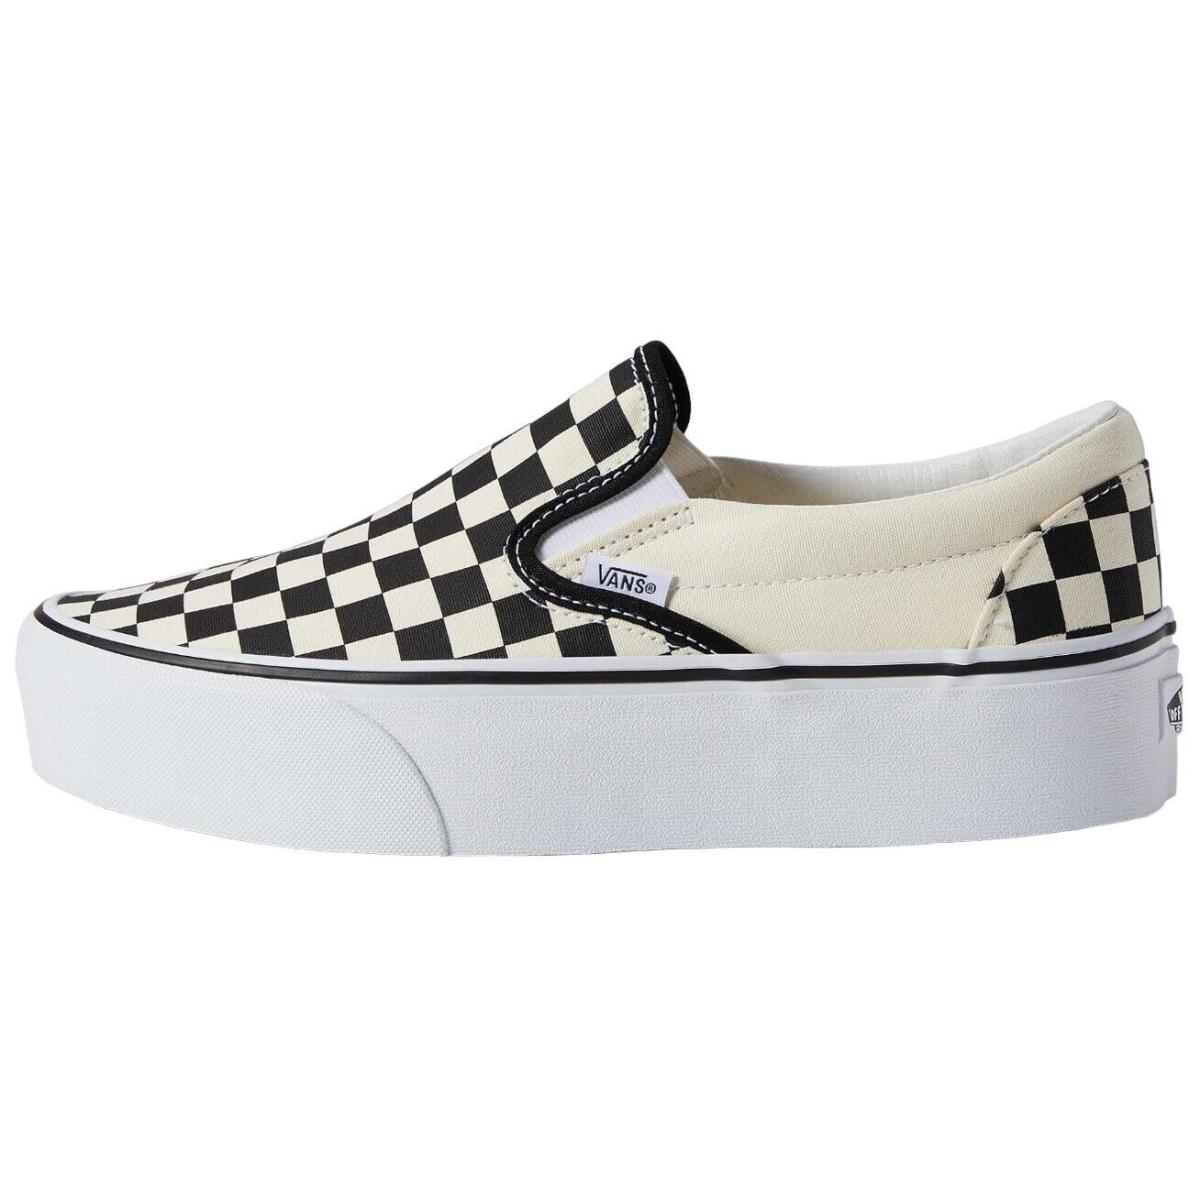 Vans Classic Slip-on Stackform Shoes Mens Womens Canvas Platform Sneakers Checkerboard Black/Classic White